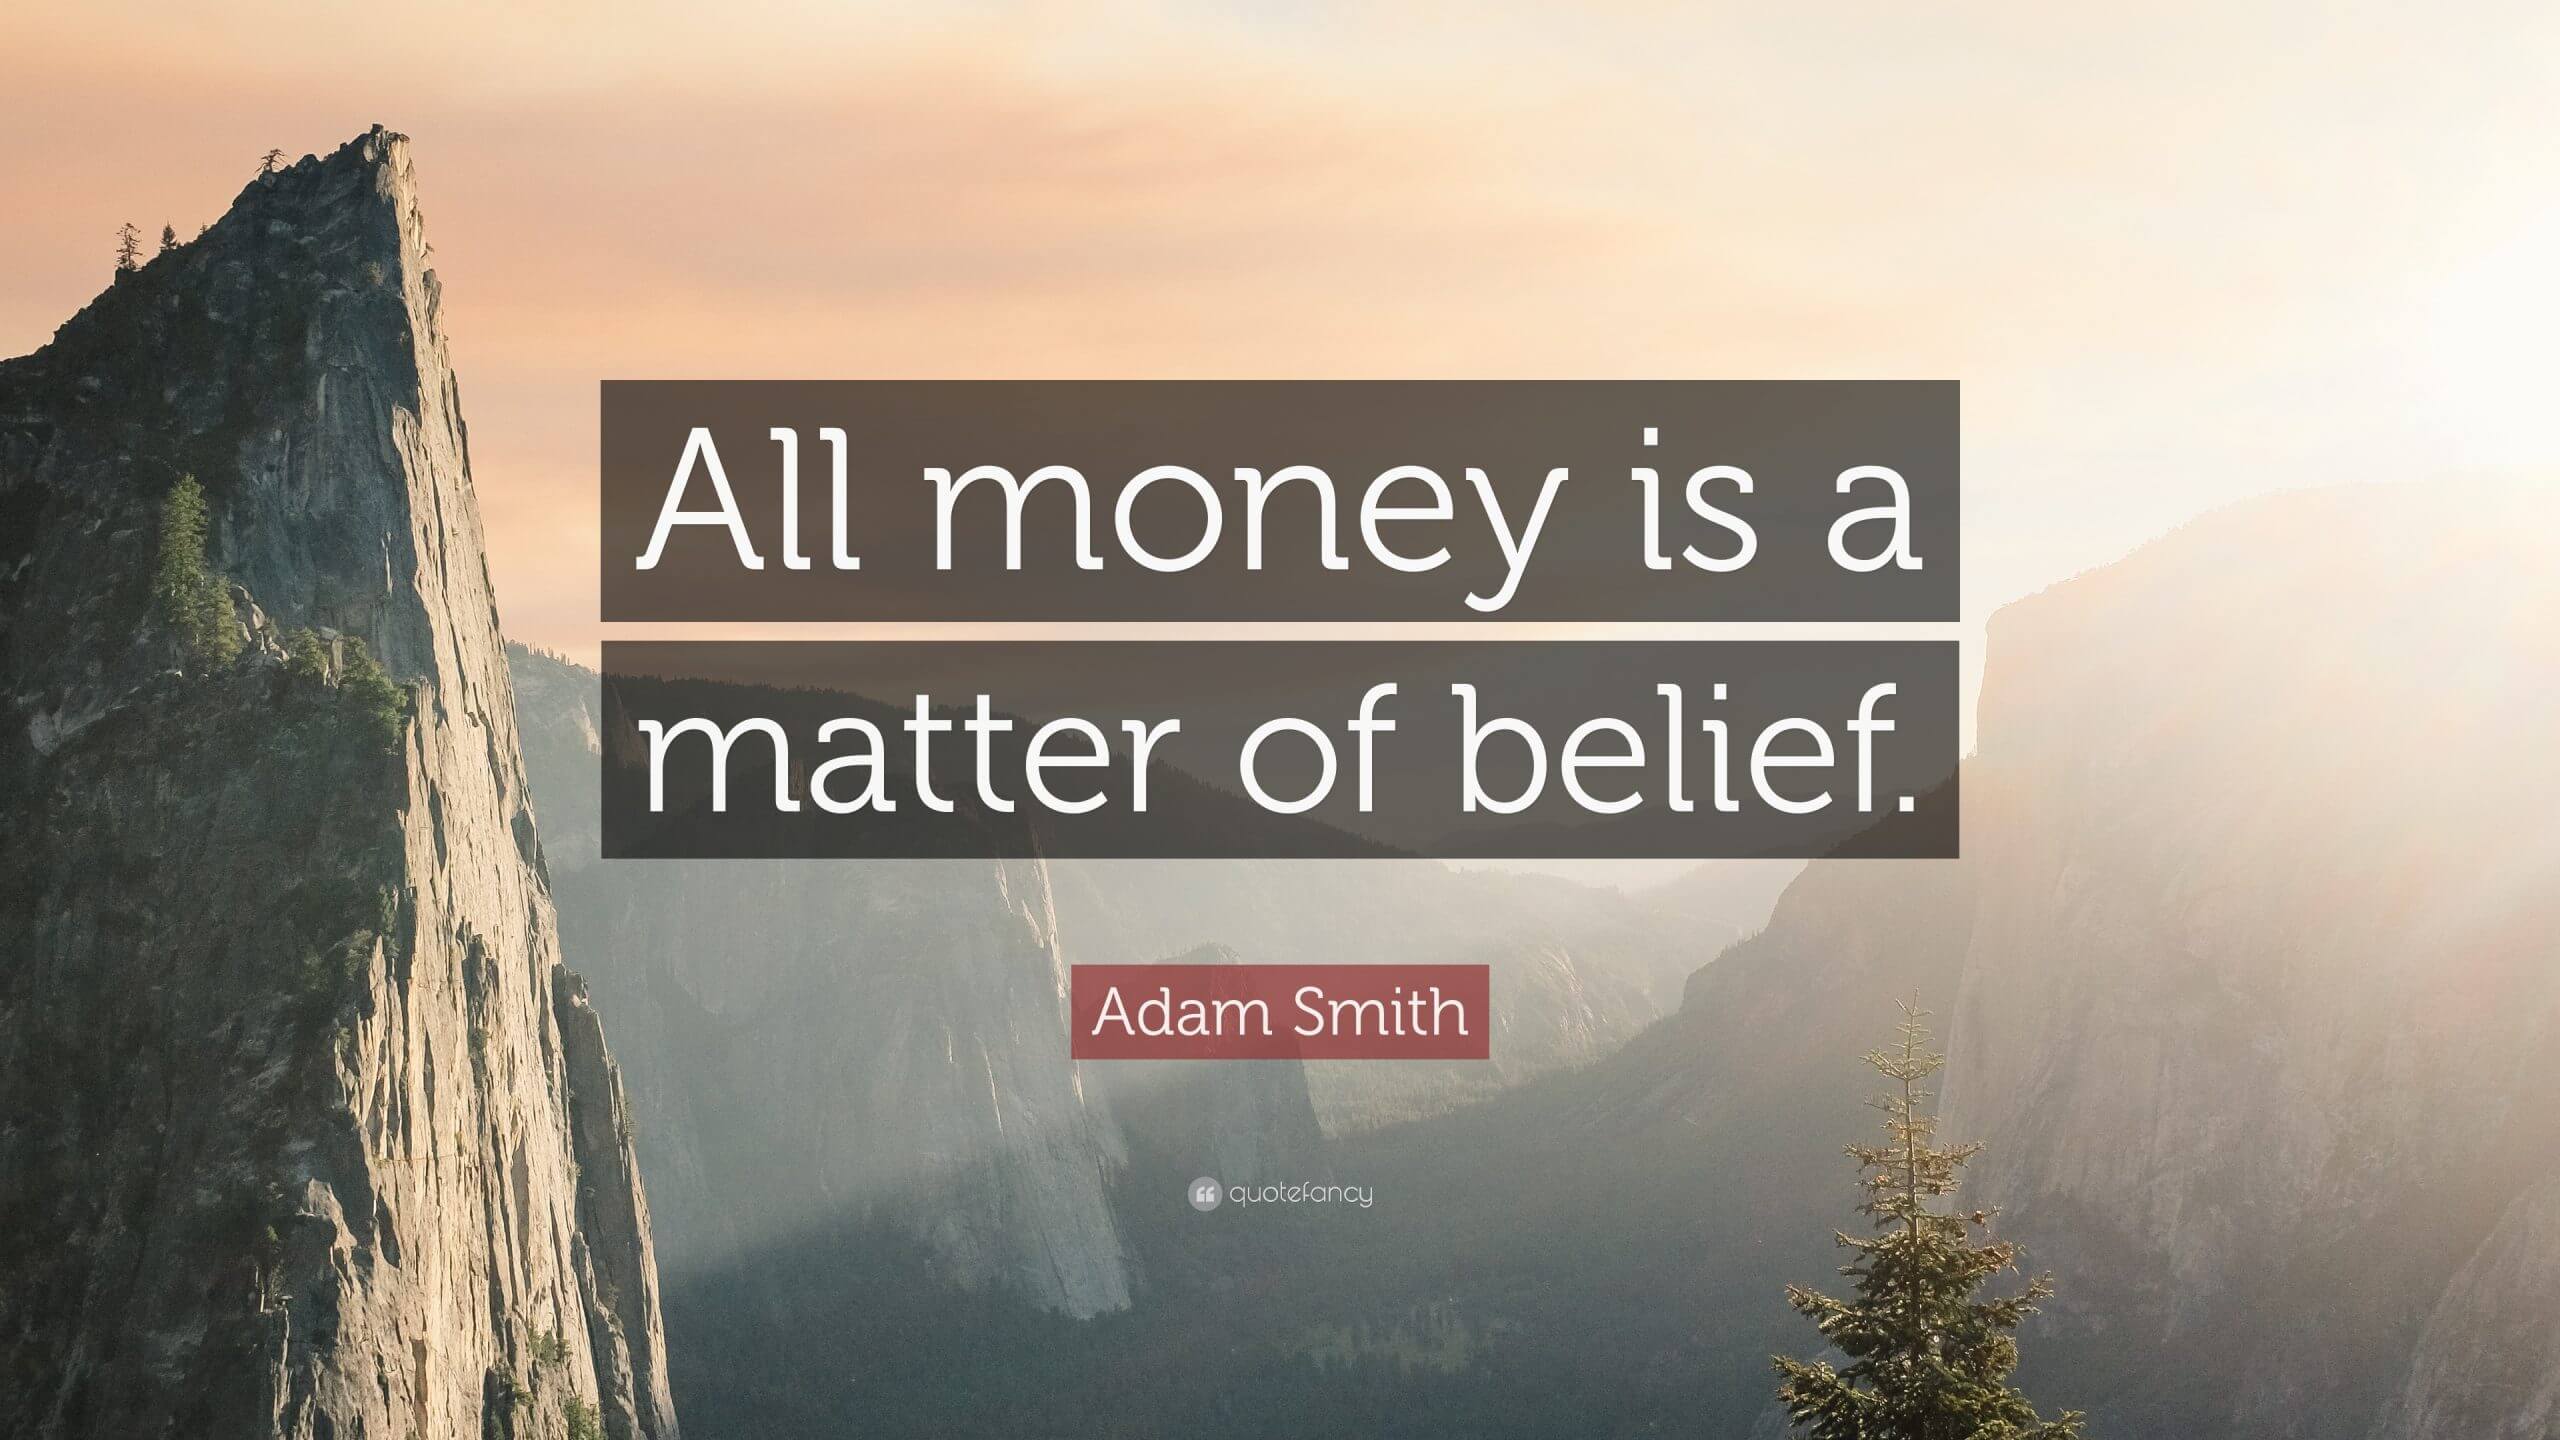 What do you believe about money?